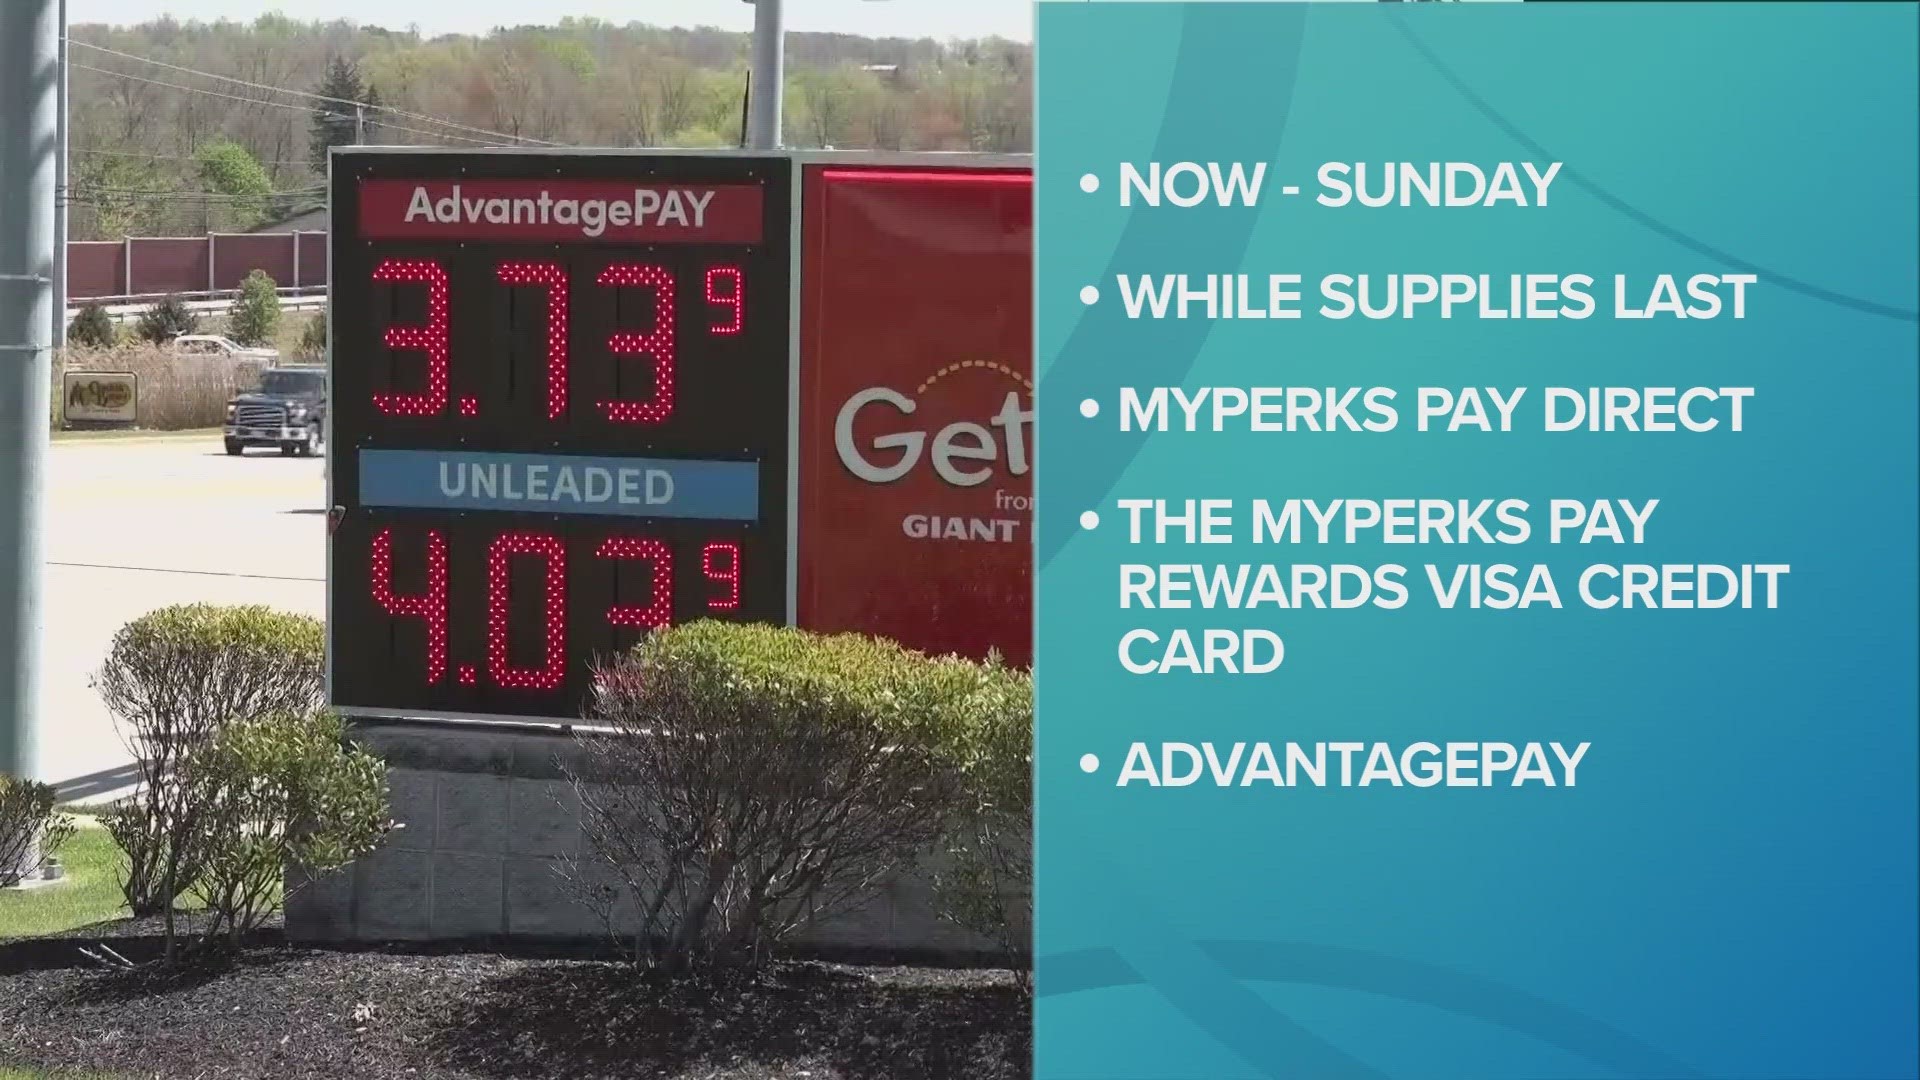 The discount applies to any fuel purchase made with myPerks Pay Direct, the myPerks Pay Rewards Visa Credit Card and AdvantagePay.